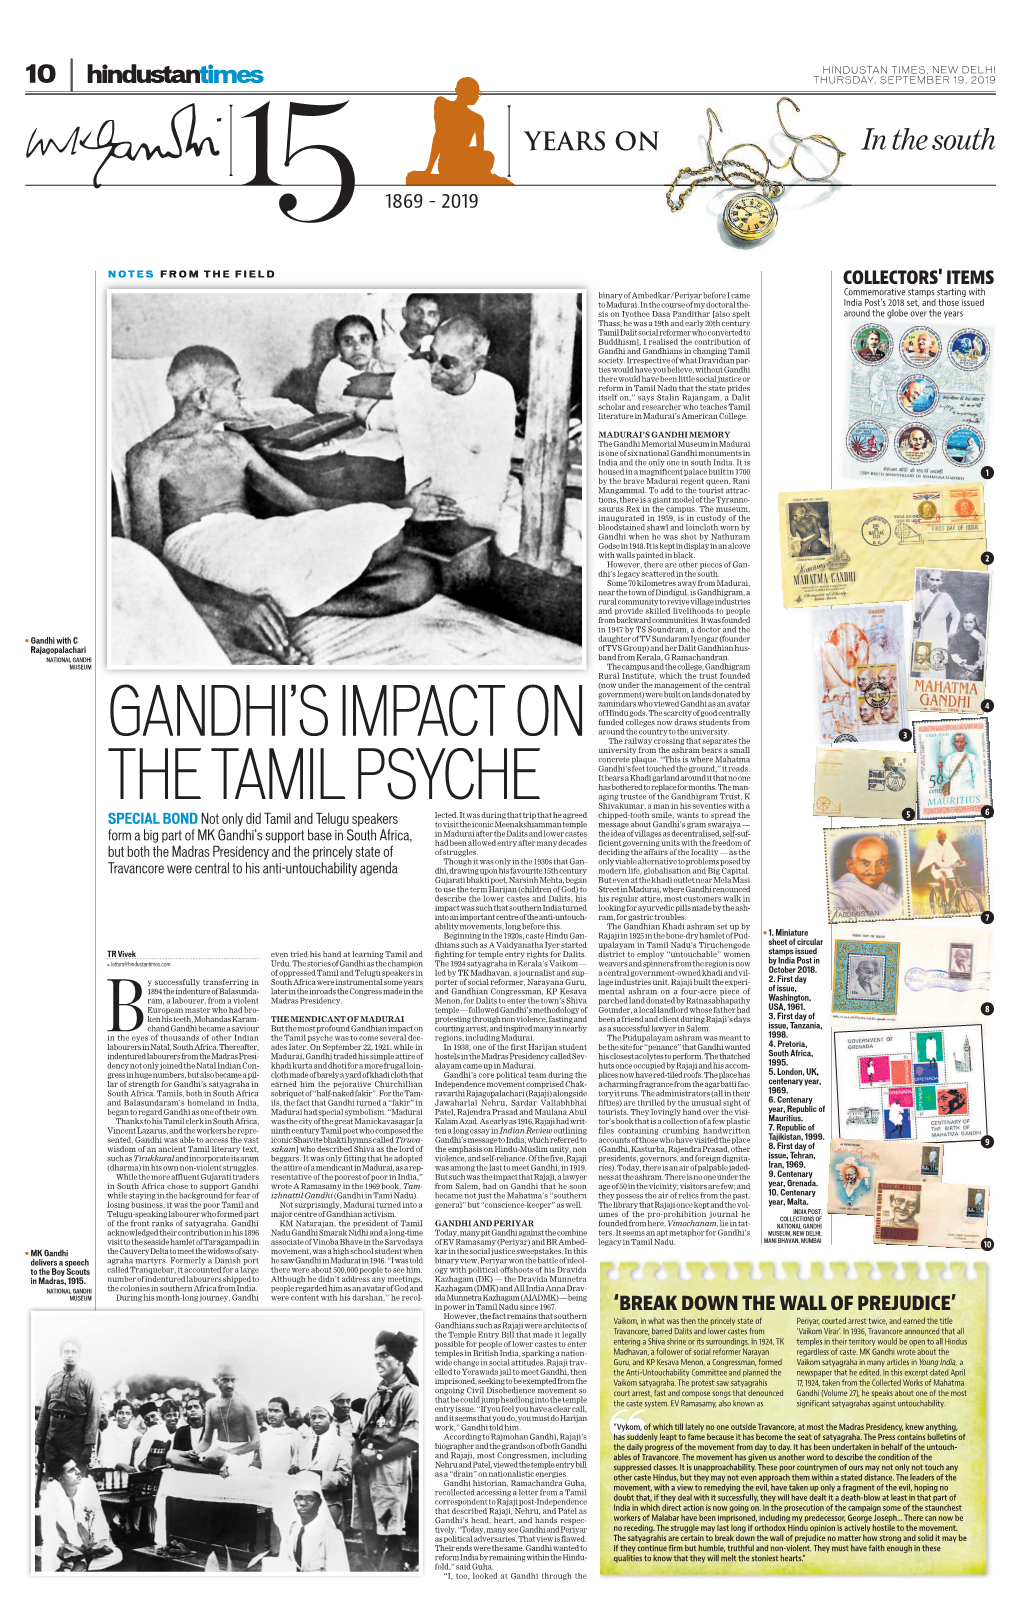 Gandhi's Impact on the Tamil Psyche